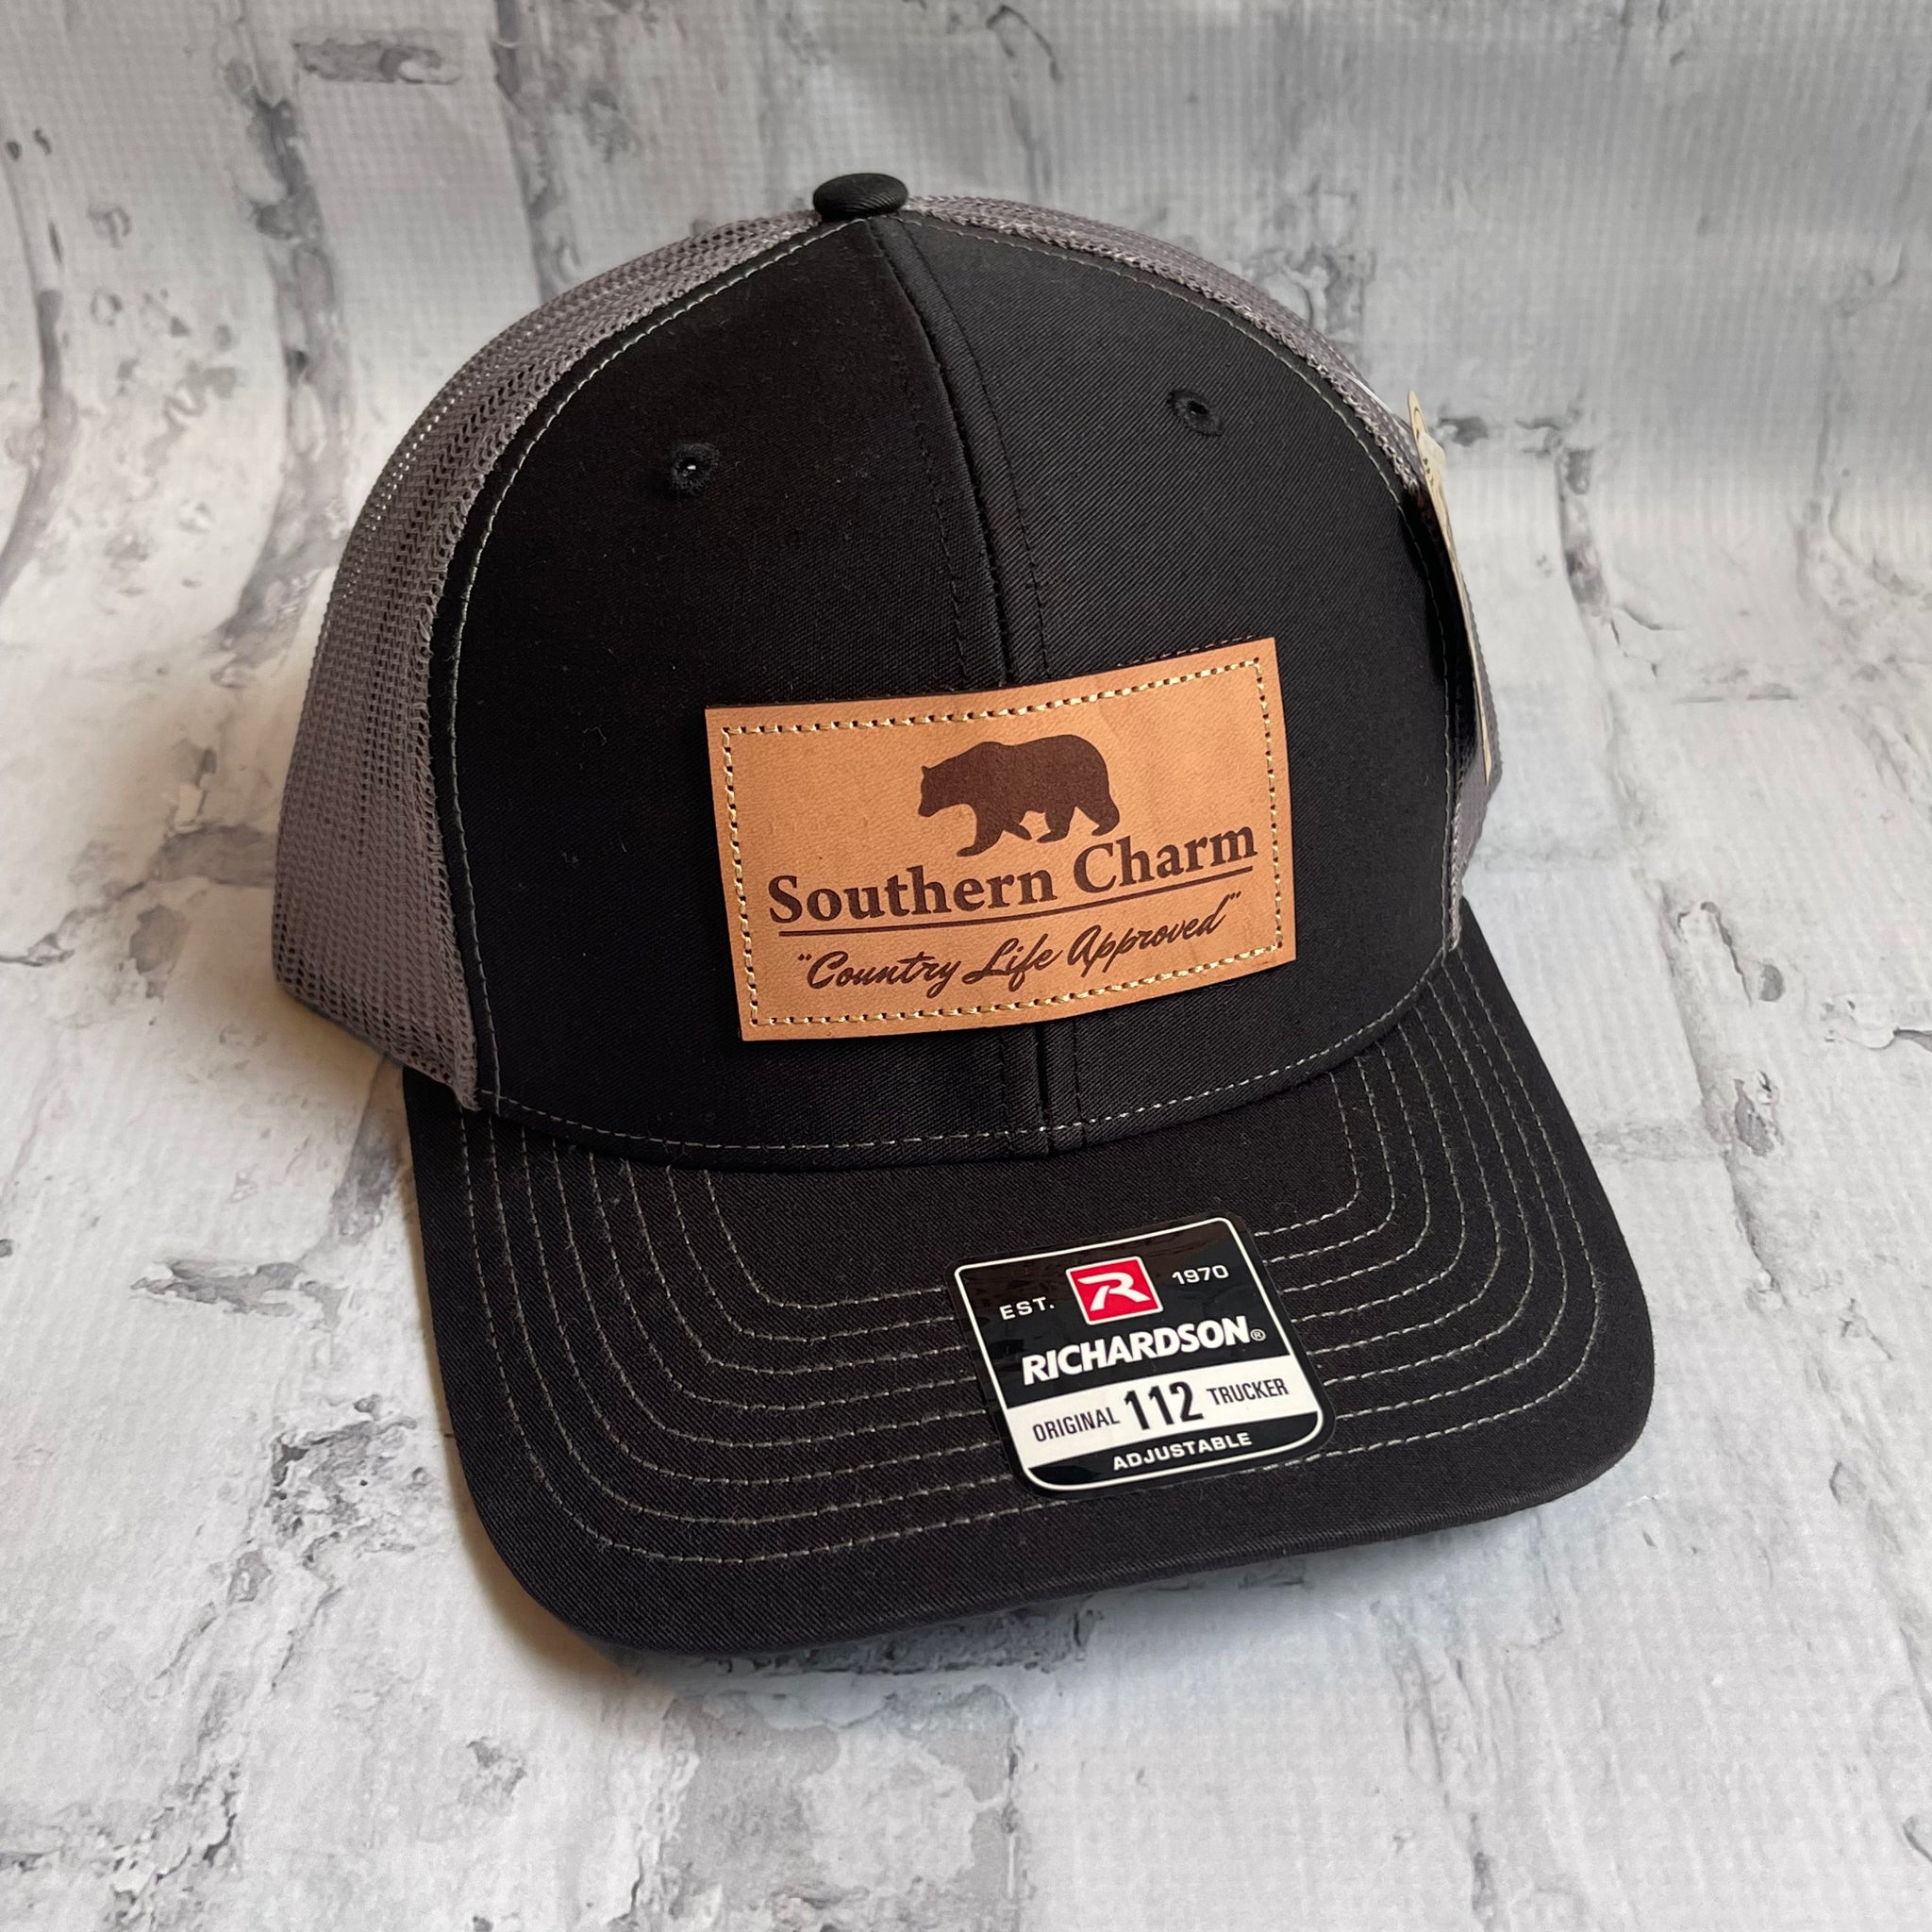 Southern Charm "Bear CLA" Hat - Black with Leather Patch - Southern Charm "Shop The Charm"